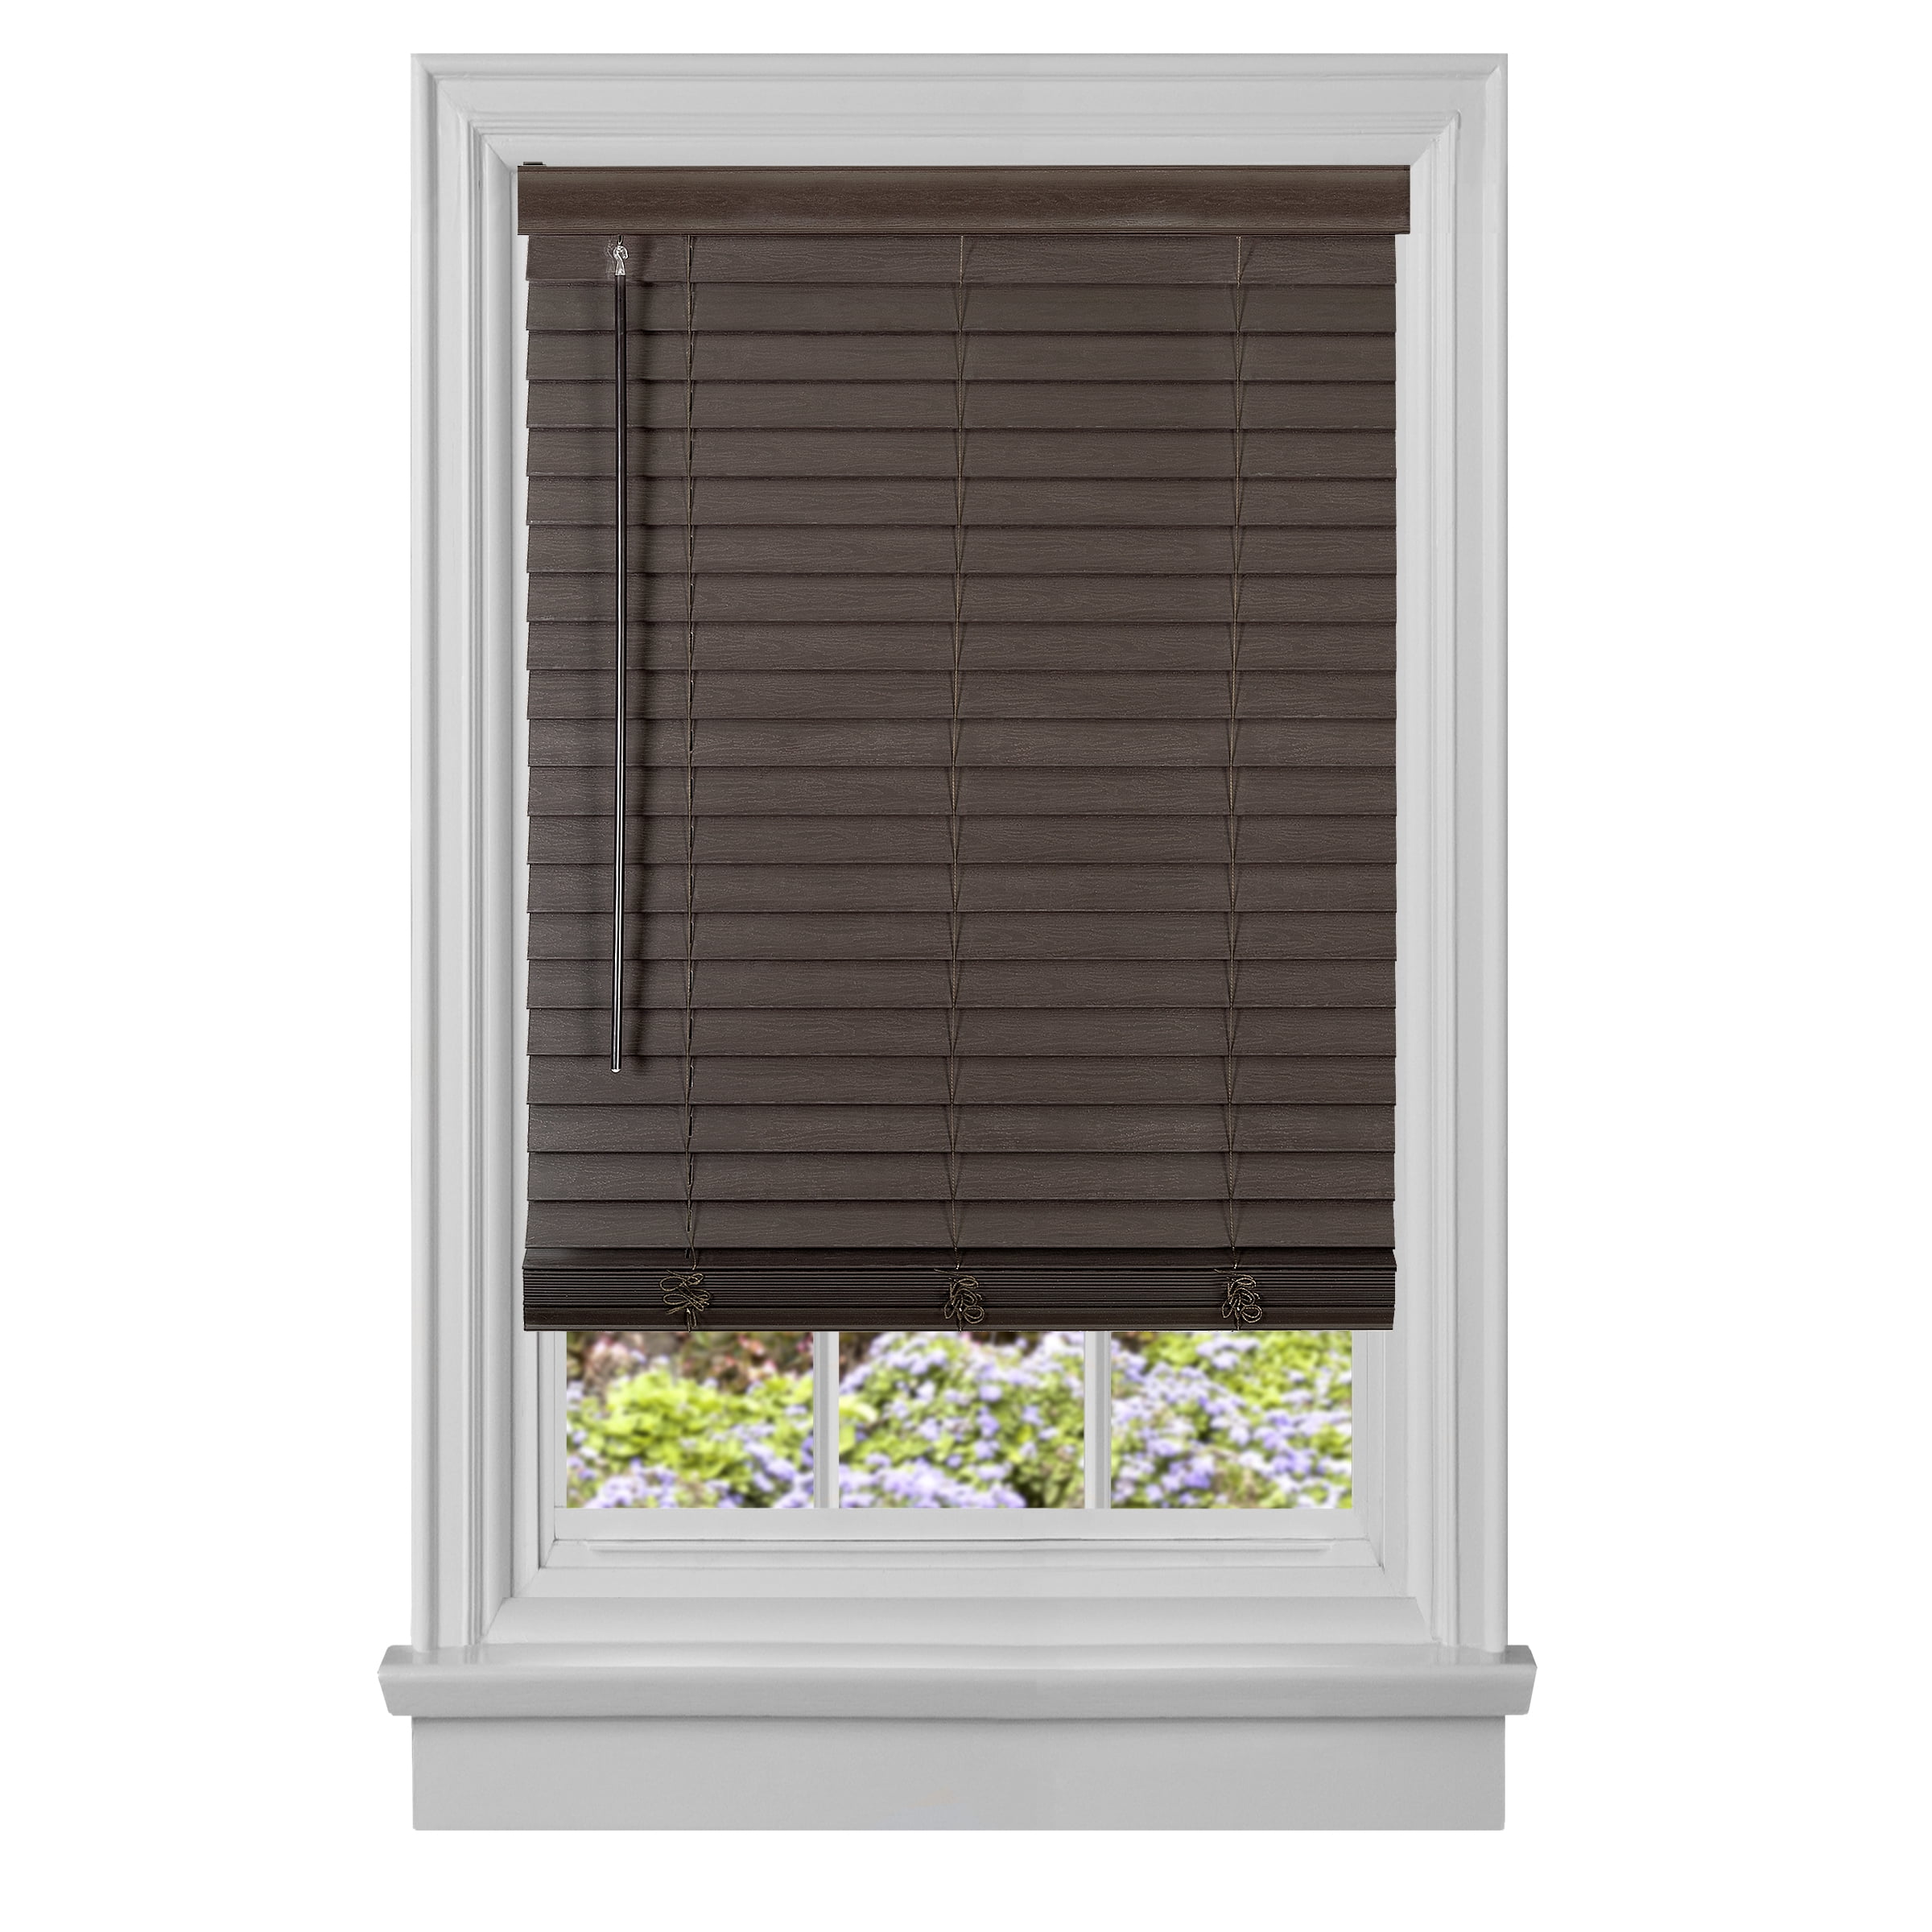 Picture of Achim MFG248MH02 48 x 64 in. Cordless GII Madera Falsa 2 in. Faux Wood Plantation Blind - Mahogany